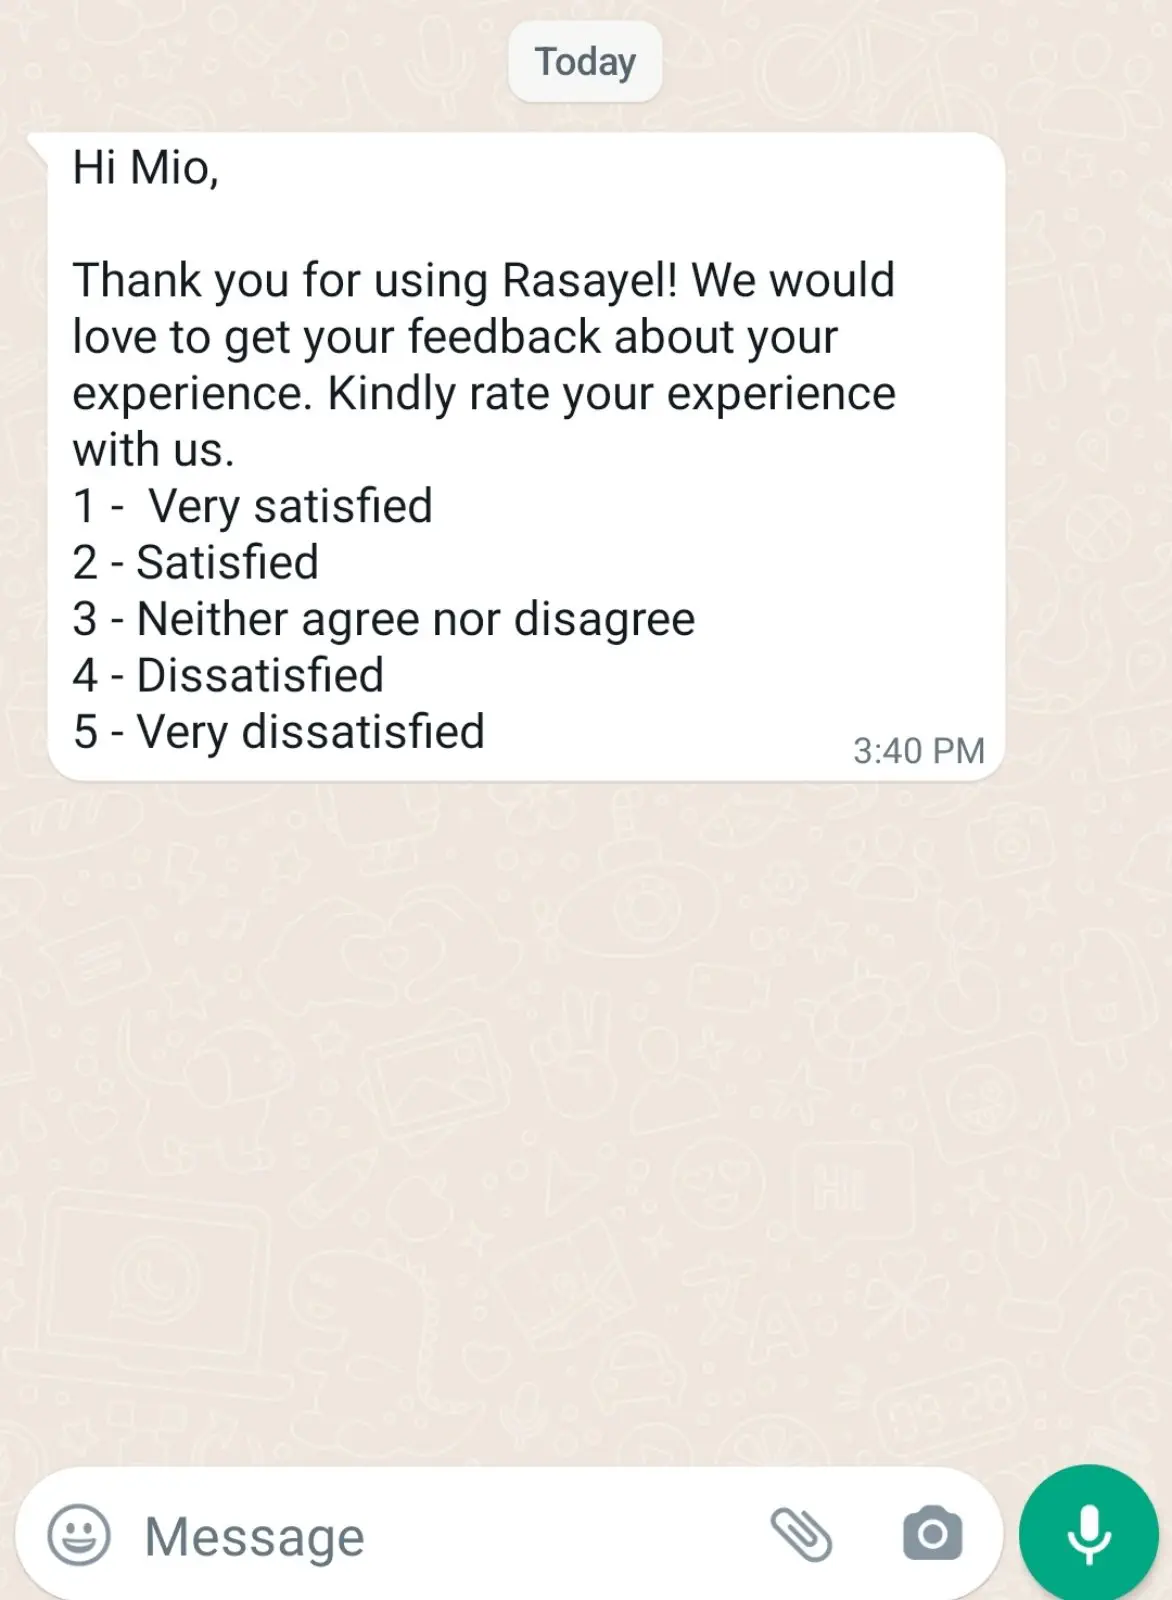 WhatsApp template for rating the experience.